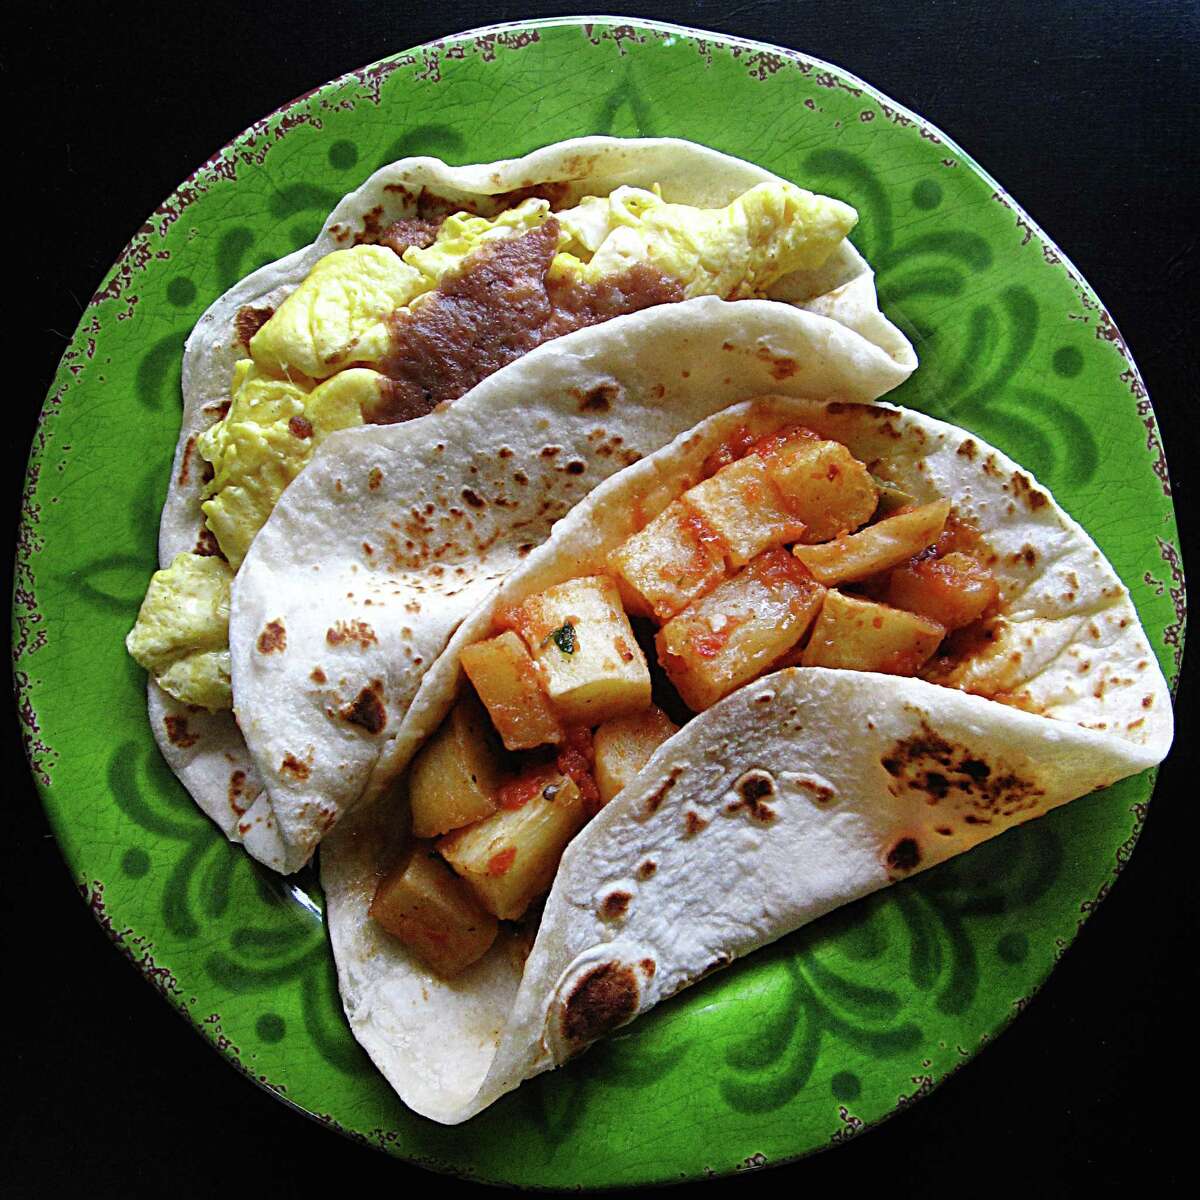 Bean and egg breakfast taco and a papas rancheras breakfast taco, both on handmade flour tortillas, from 4 Missions Cafe on Southton Road.